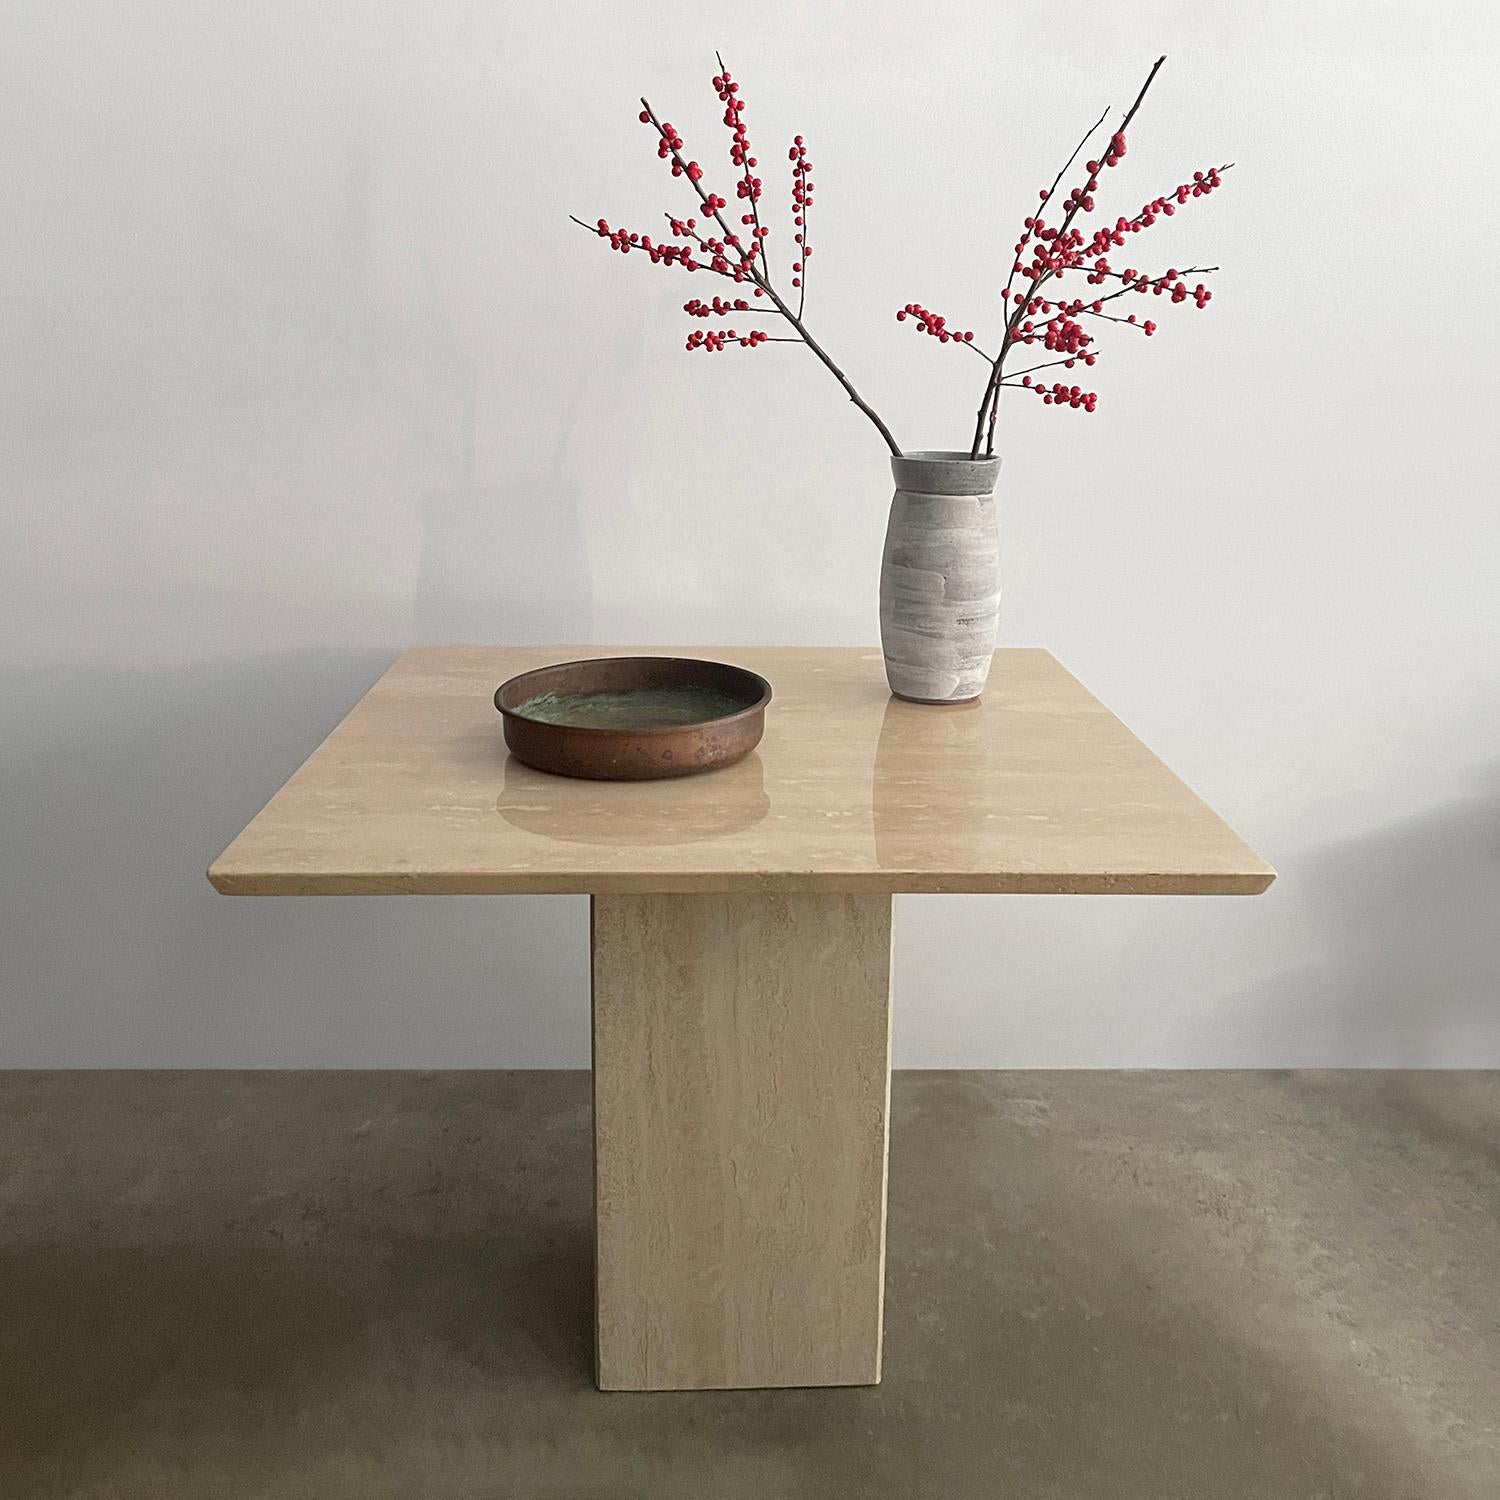 Italian travertine side table
Italy, circa 1970s 
Organic composition and feel 
Minimalist design with clean lines and neutral toned palette
Natural color variations throughout stone
Beveled edge top rests upon the square column base 
Texture and